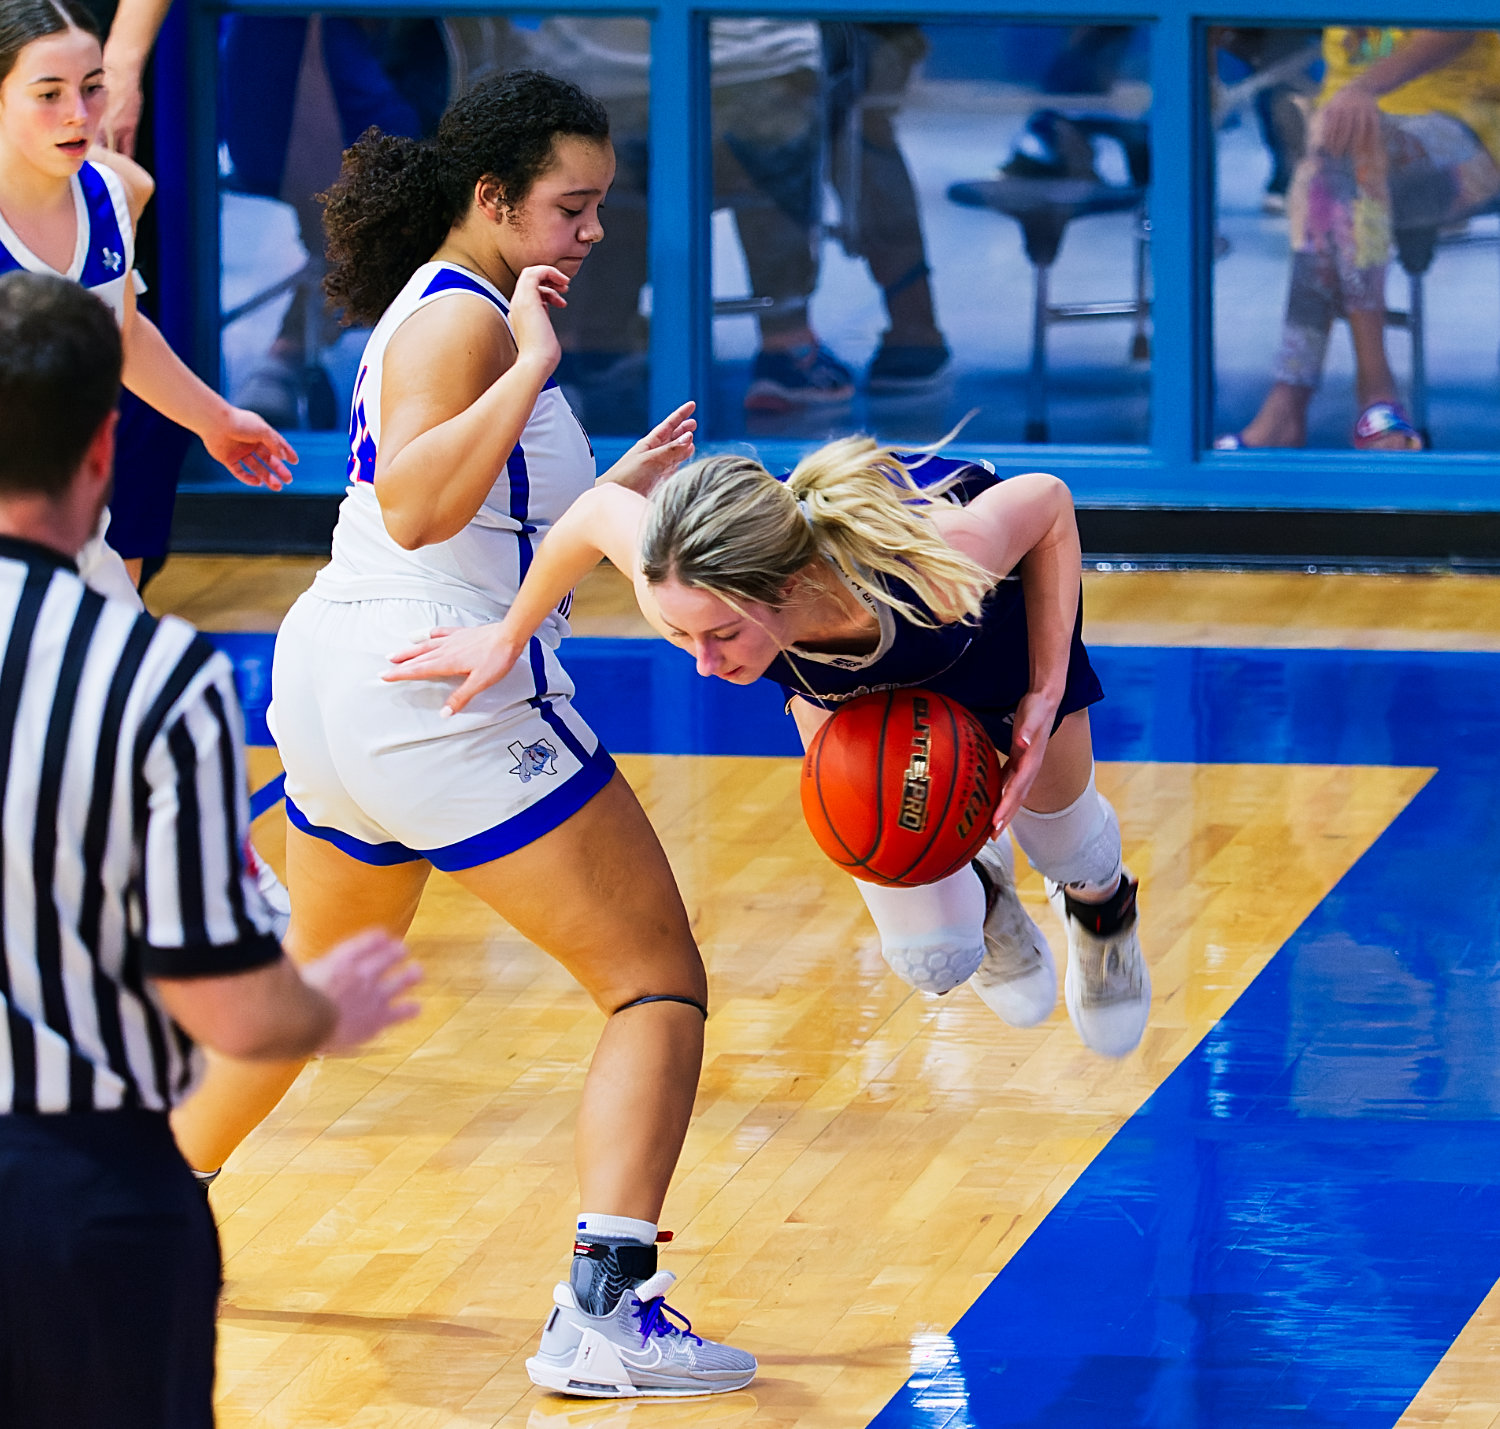 Ashley Davis successfully uses the boundary to force a turnover. [see more shots, buy basketball photos]